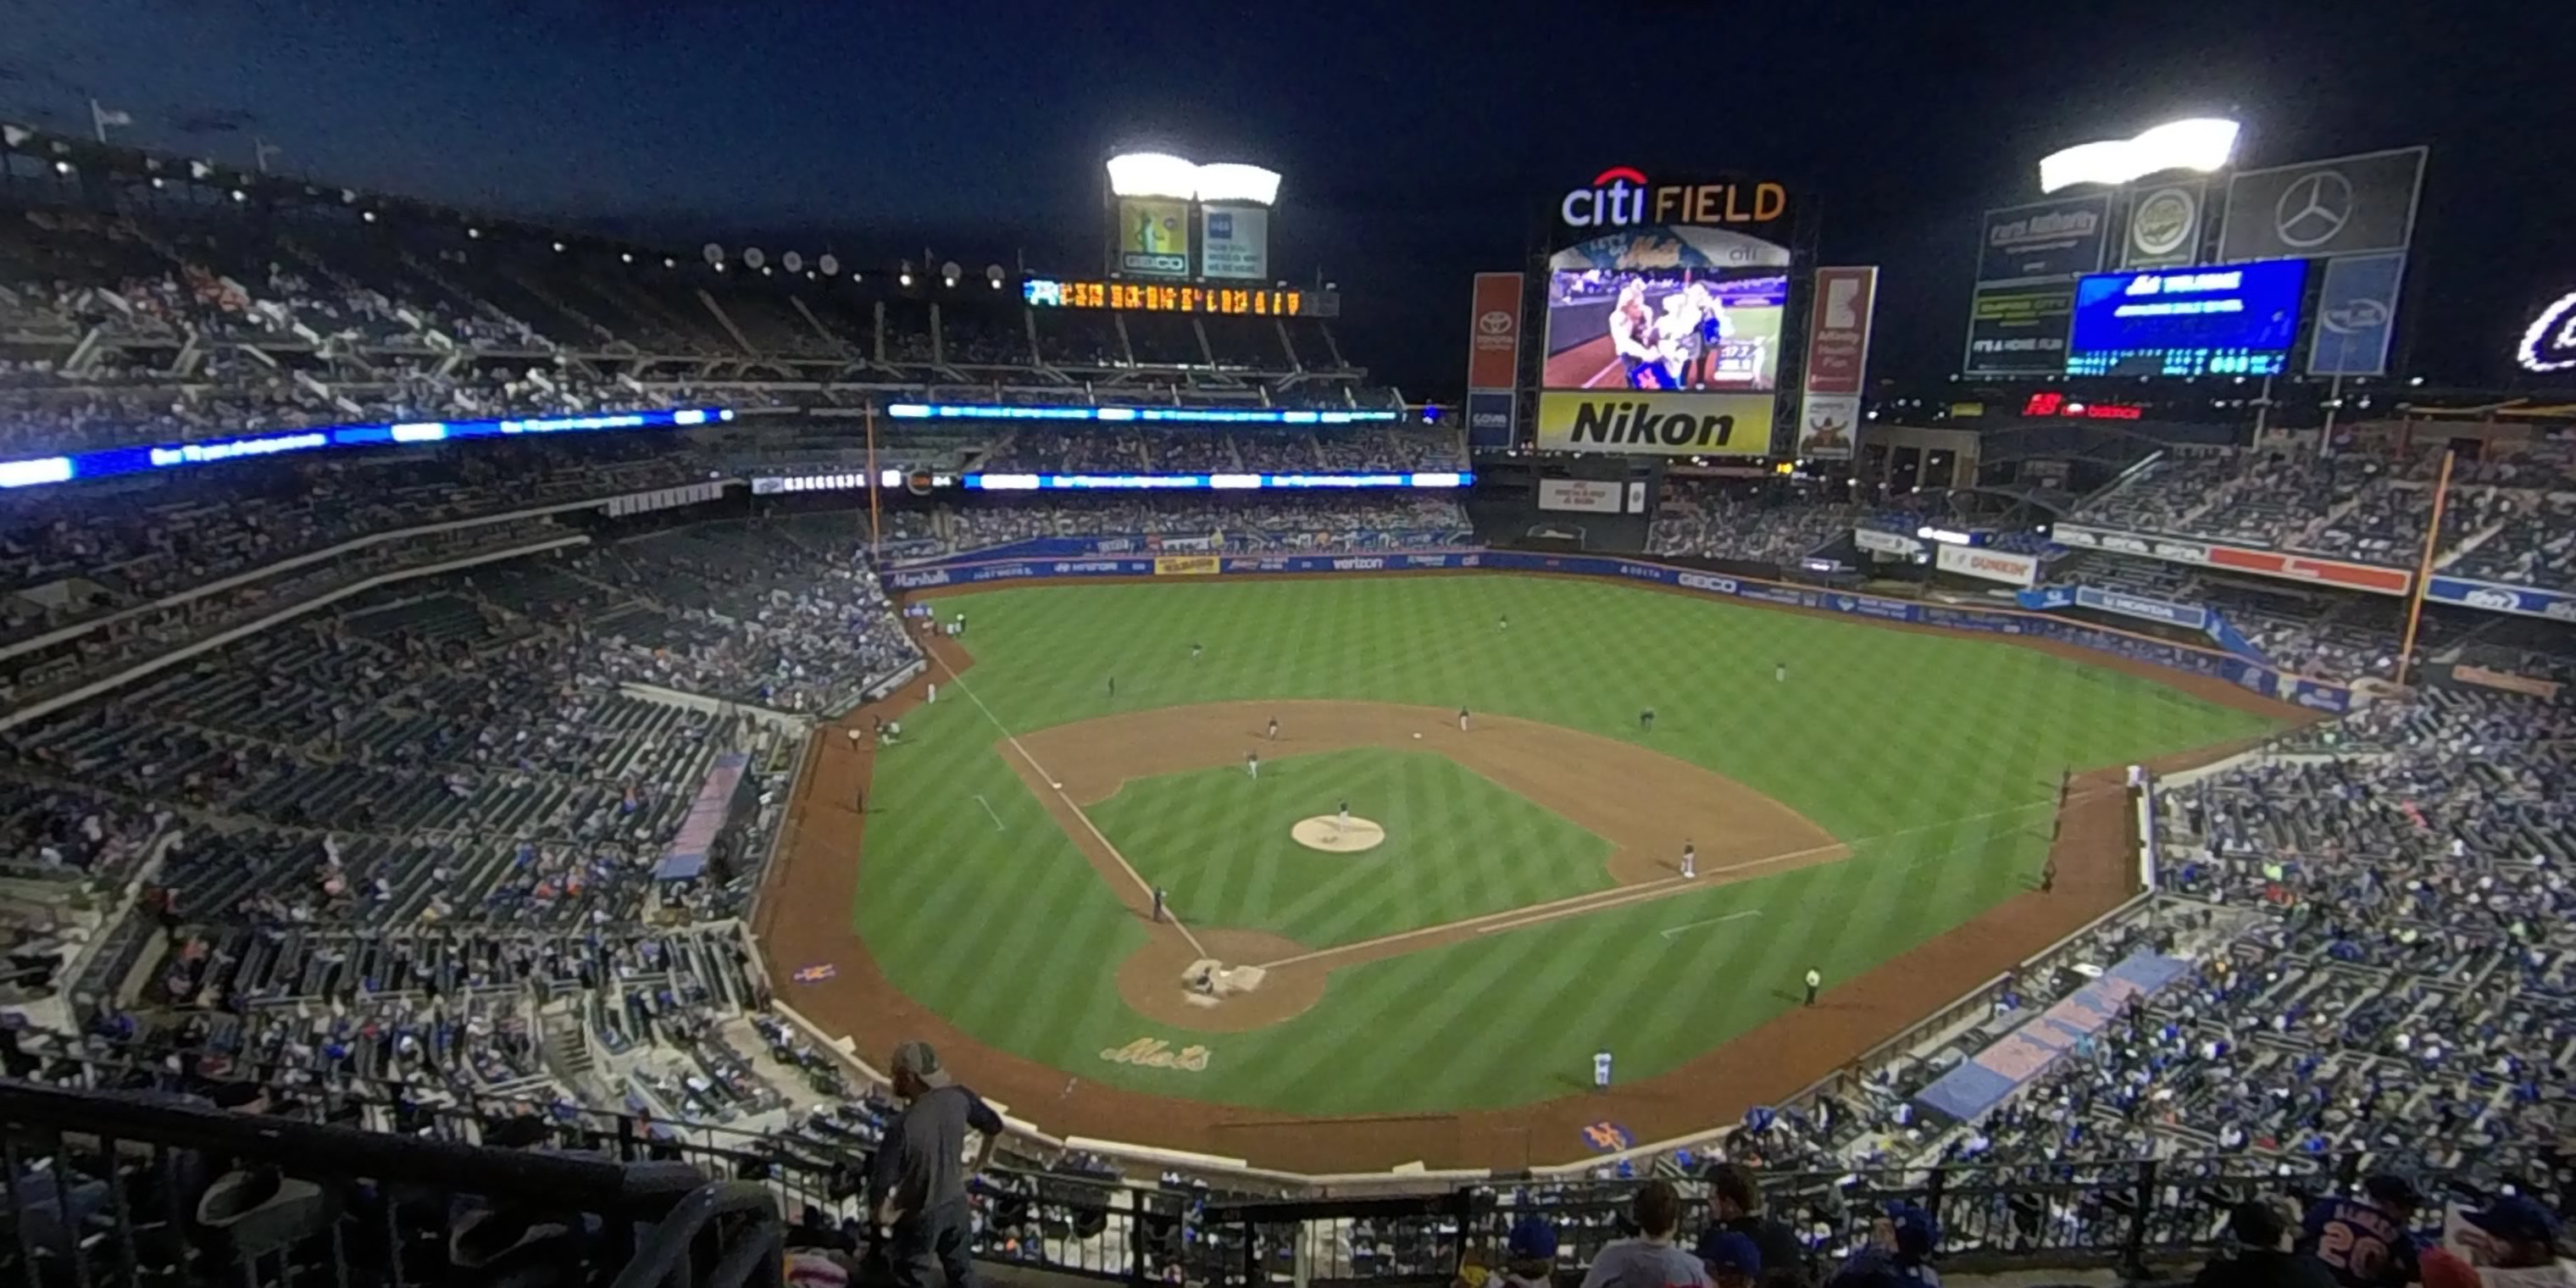 section 412 panoramic seat view  - citi field